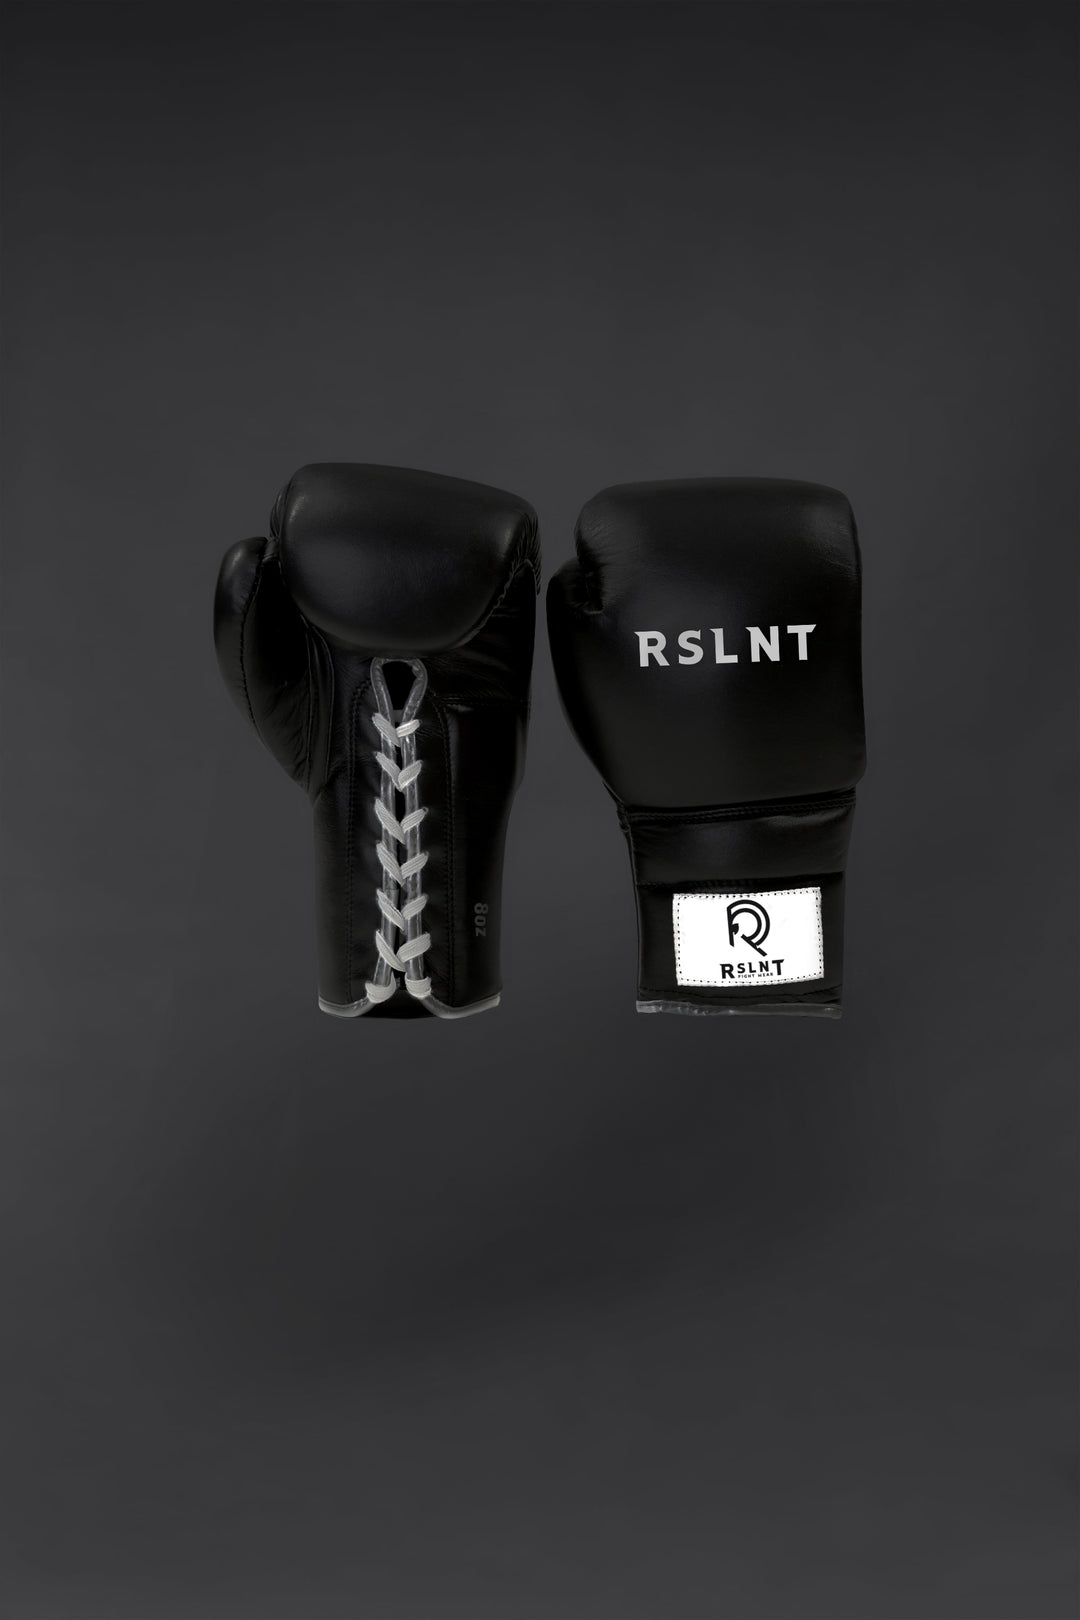 RSLNT Signature Lace Up Gloves